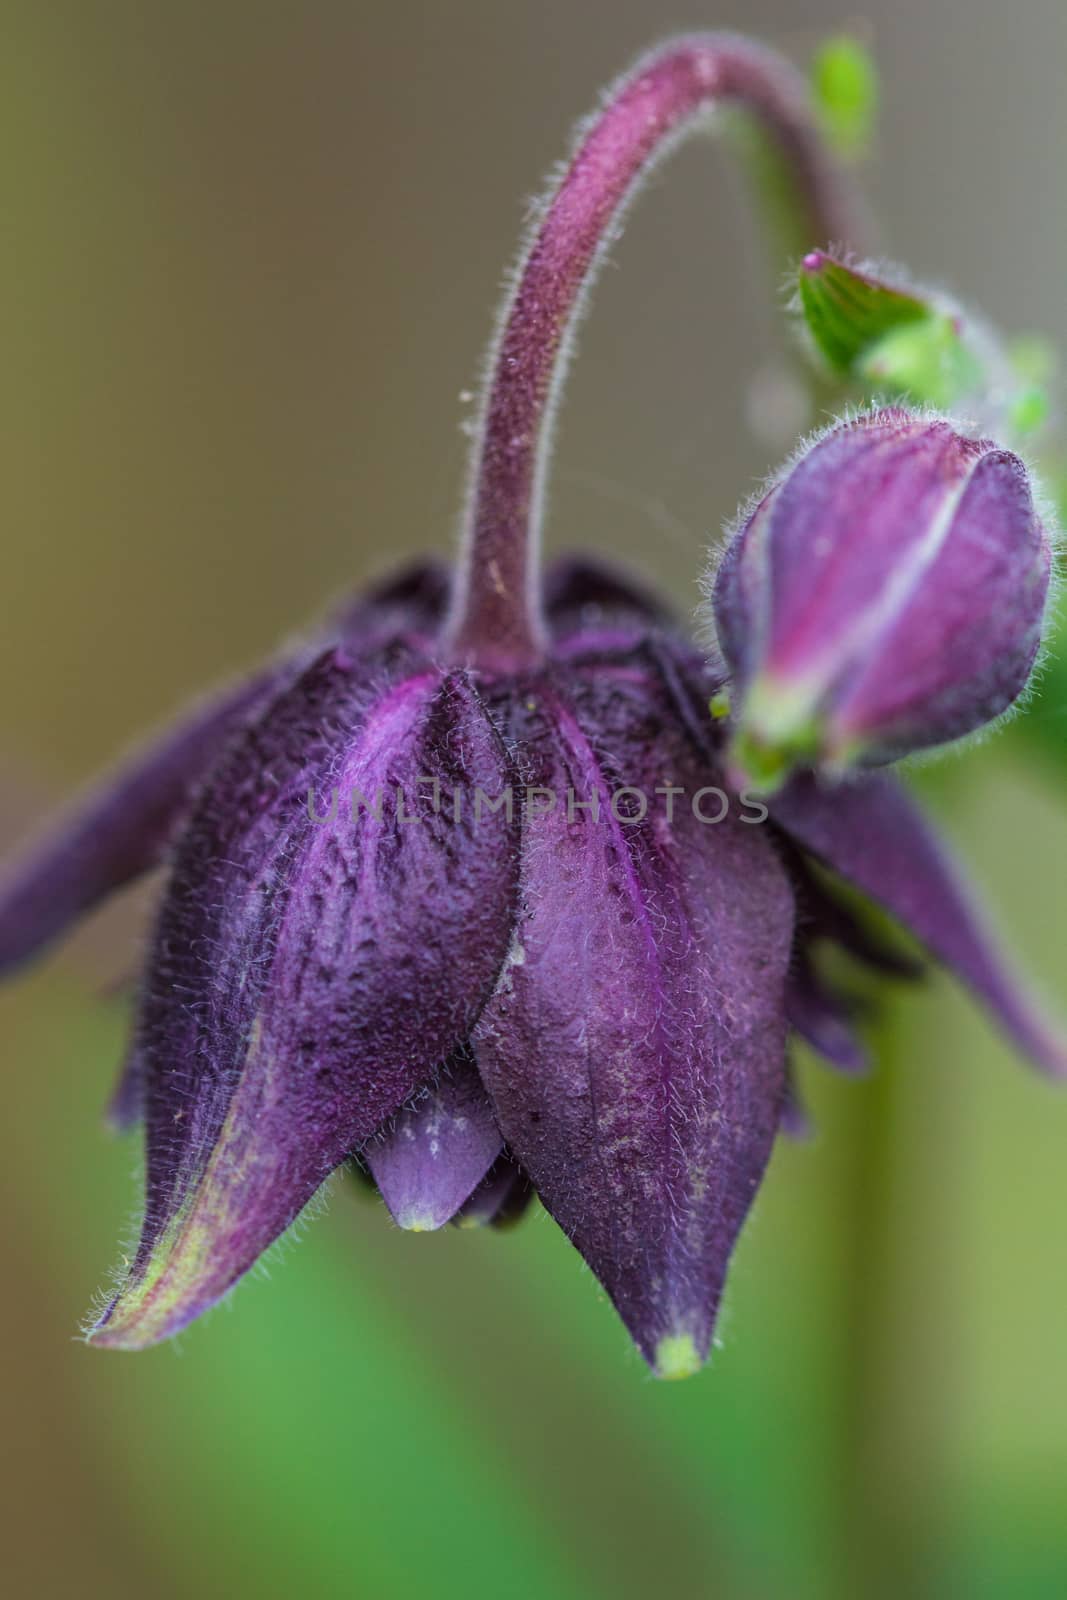 A close up image of the Aquilegia Vulgaris (Royal Purple) flower.  Commonly known as Granny's Bonnet